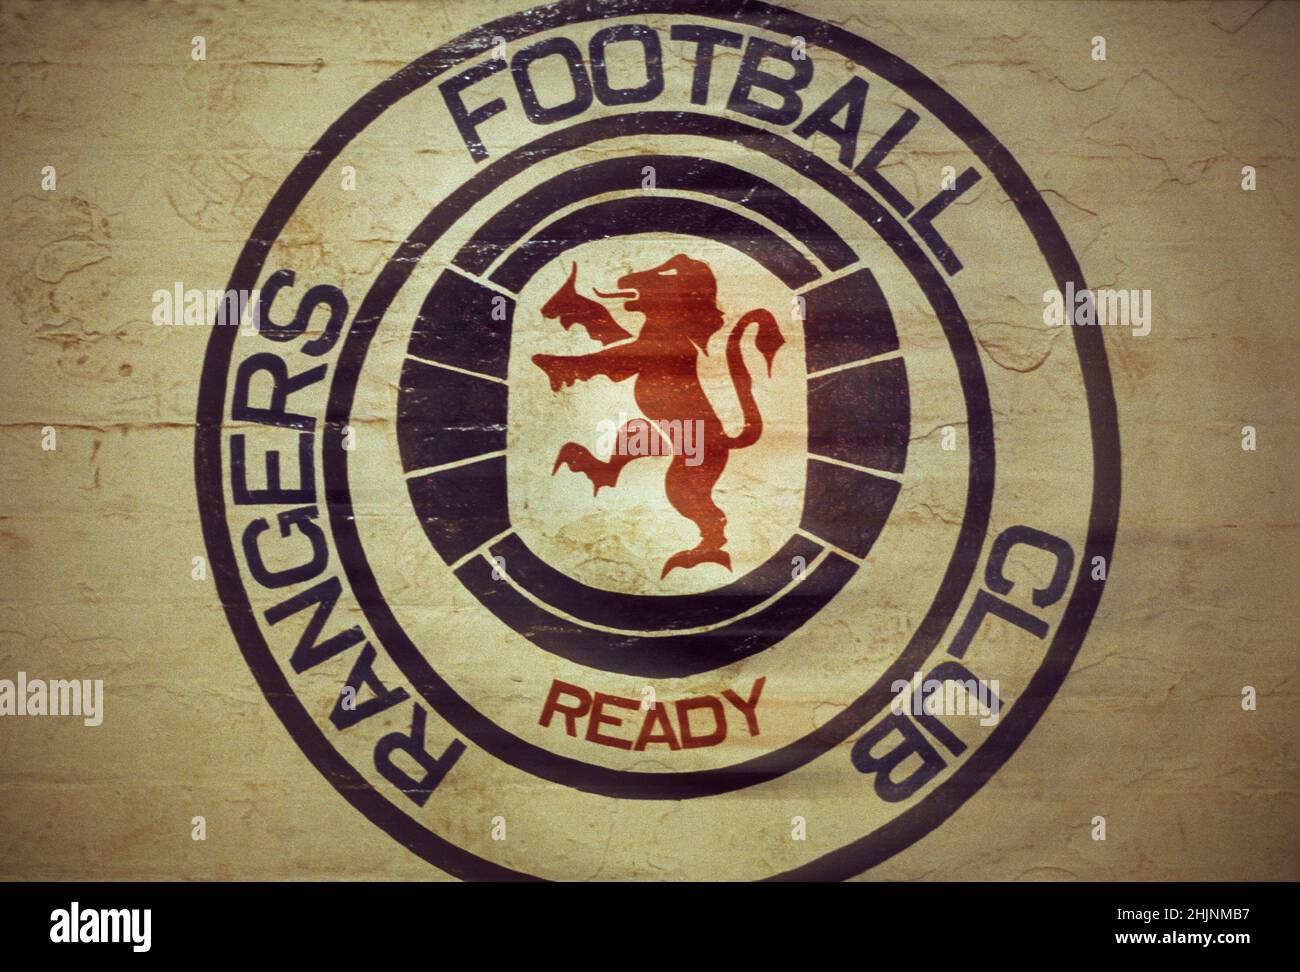 GLASGOW RANGERS Ibrox arean with the club emblem on the wall Stock Photo